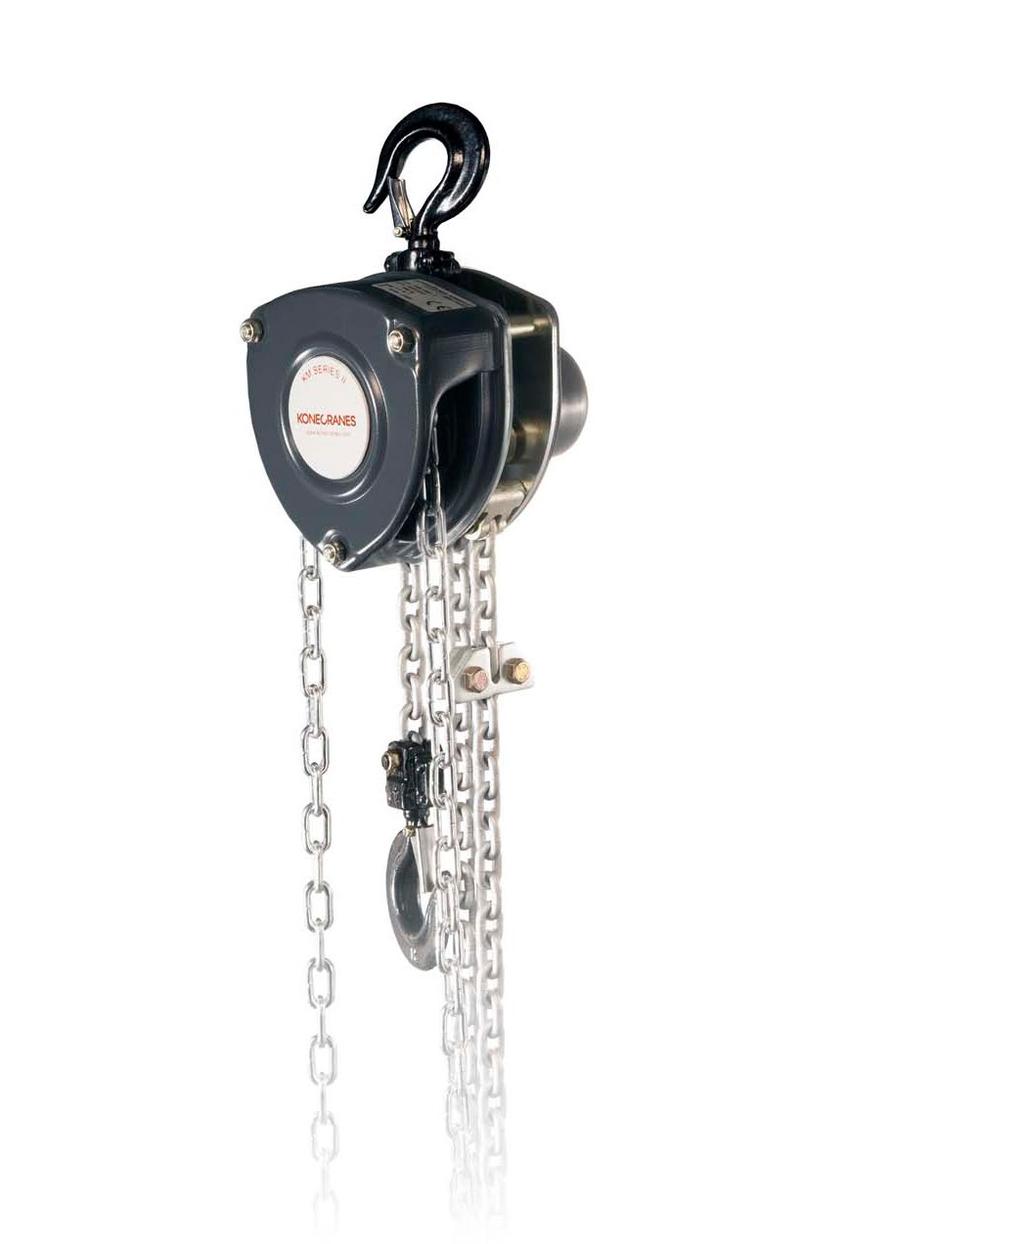 MANUAL PRODUCTS SAFE AND RELIABLE MANUAL LIFTING Our manual products are an excellent choice for any environment, even in heavyduty operations, where electricity is impractical or not available.